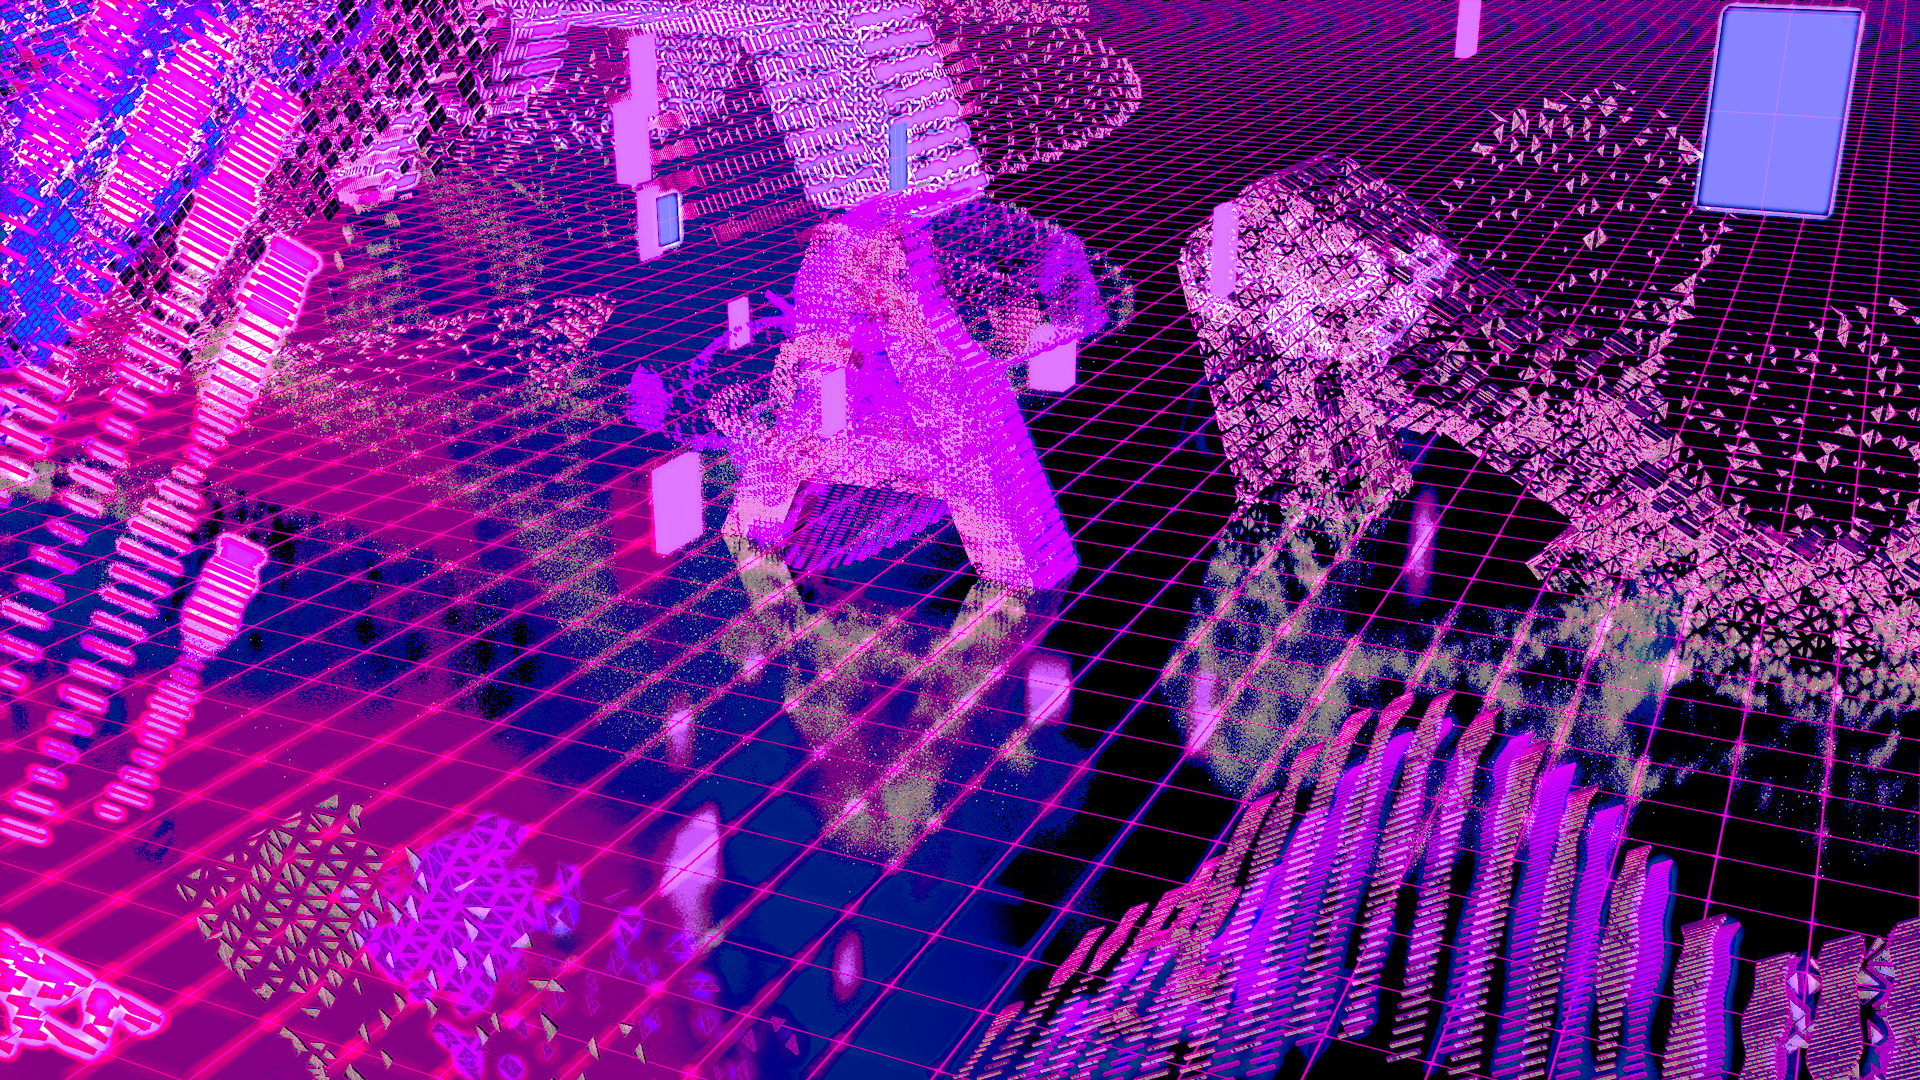 Digital image with swirling purple artifacts in space